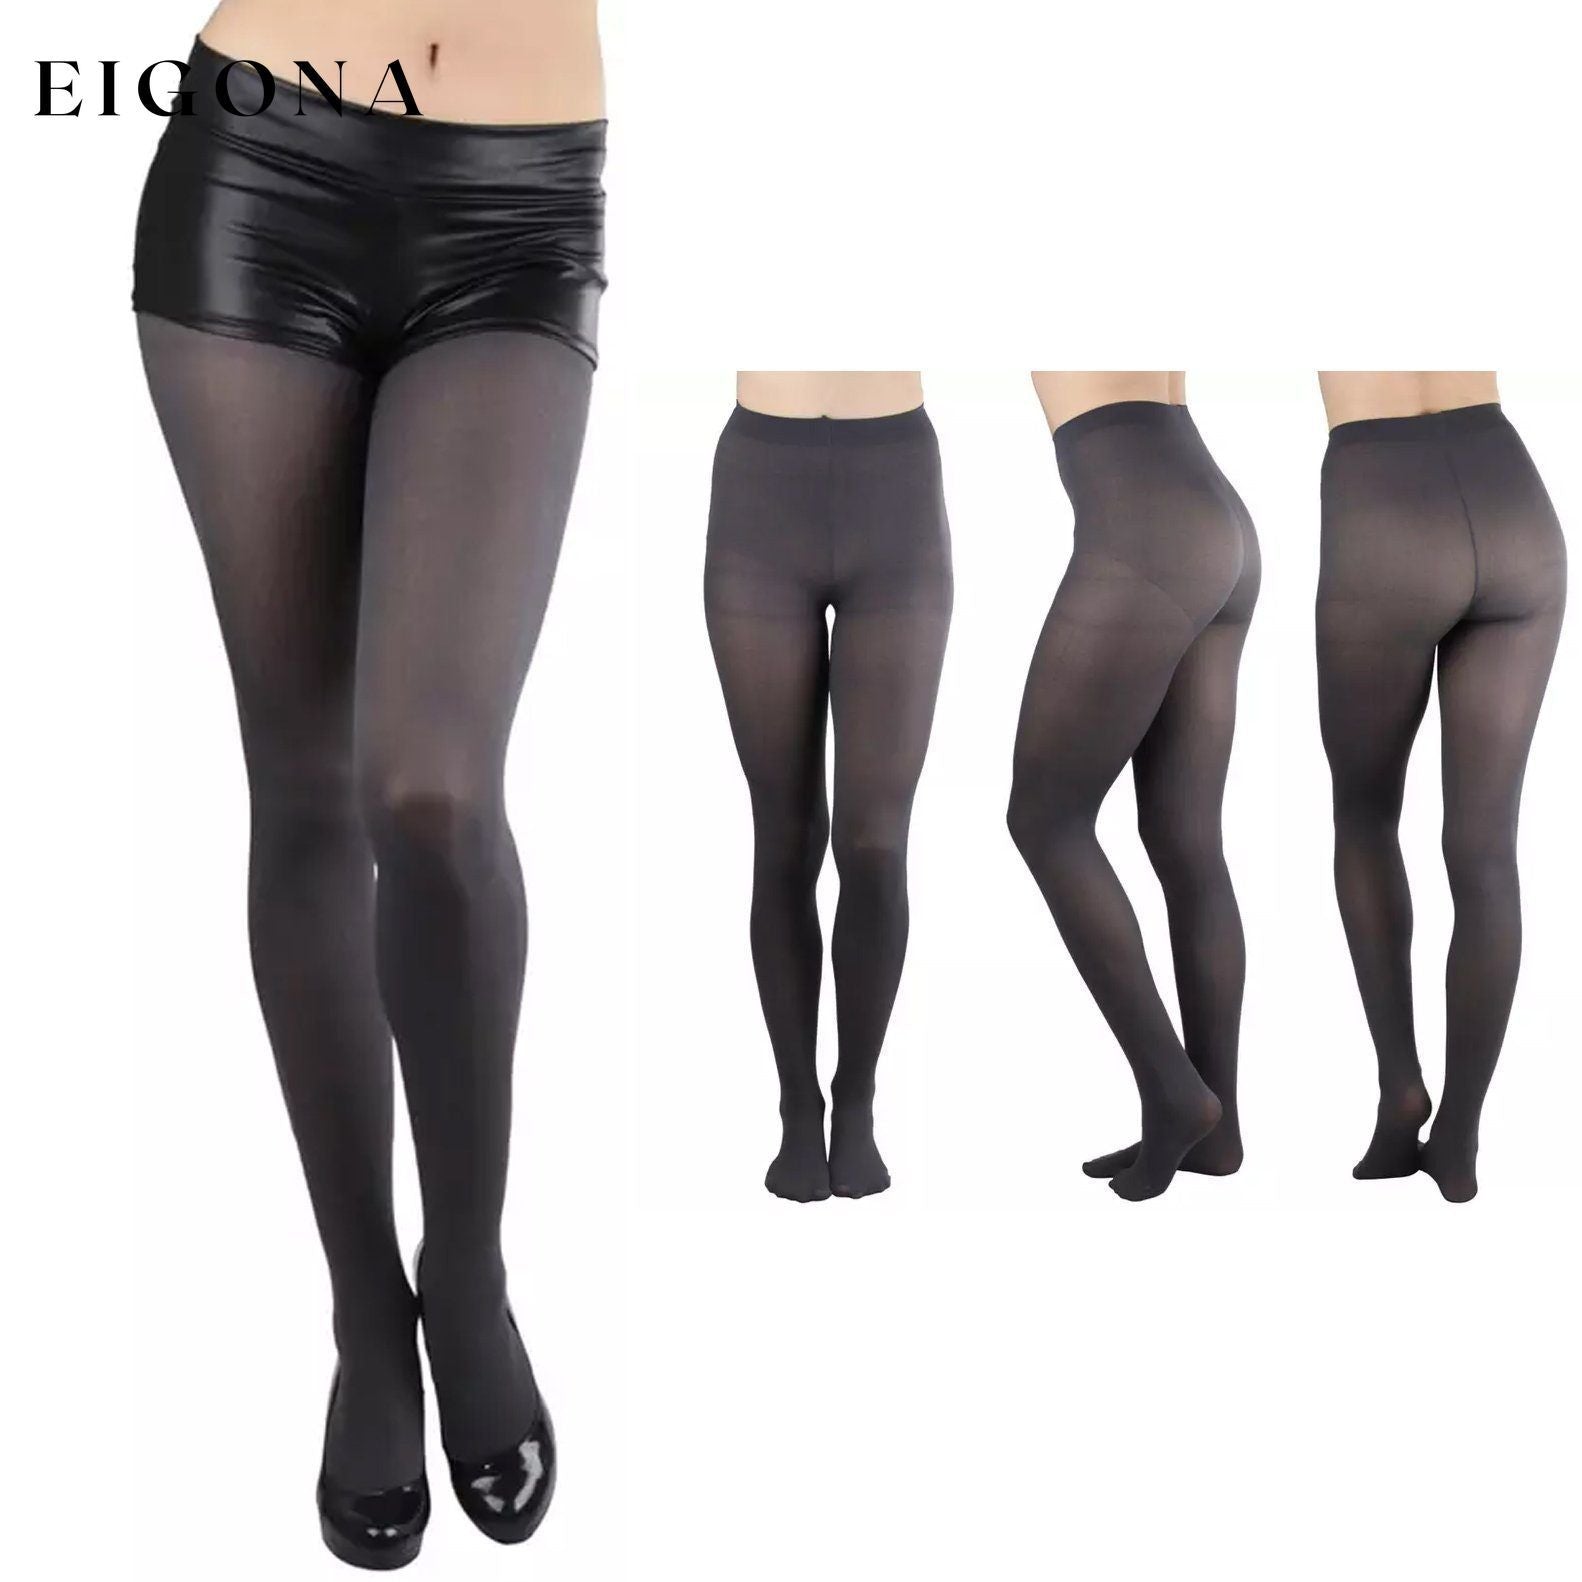 6-Pack: Women's Basic or Vibrant Semi Opaque Pantyhose Gray __stock:550 lingerie refund_fee:1200